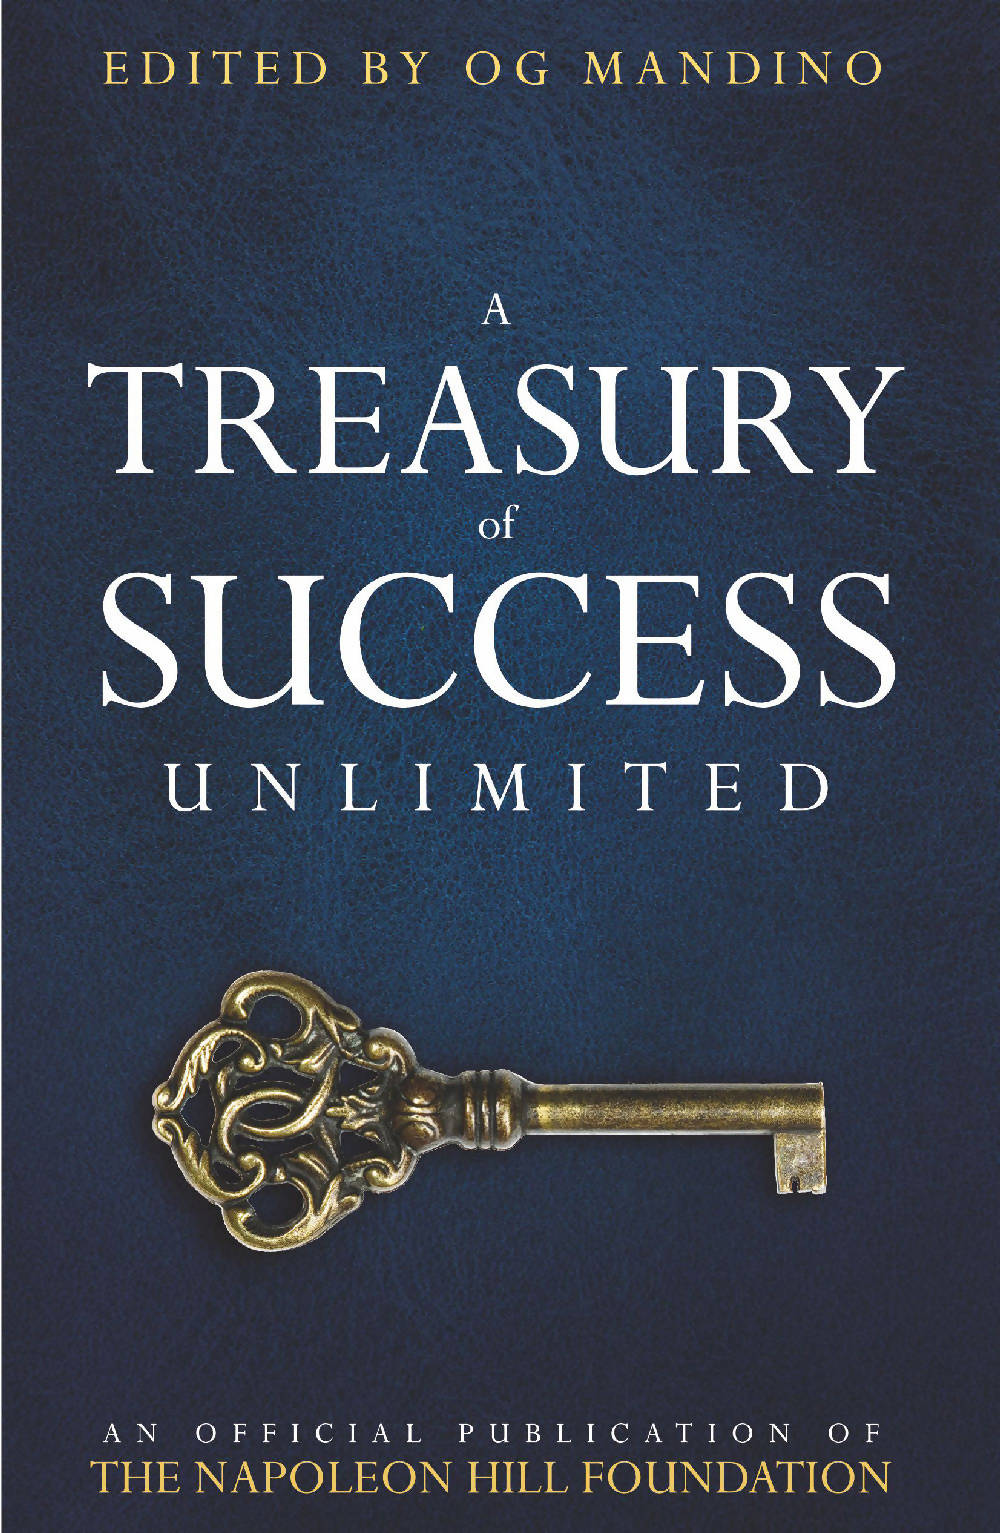 A Treasury of Success Unlimited: An Official Publication of The Napoleon Hill Foundation